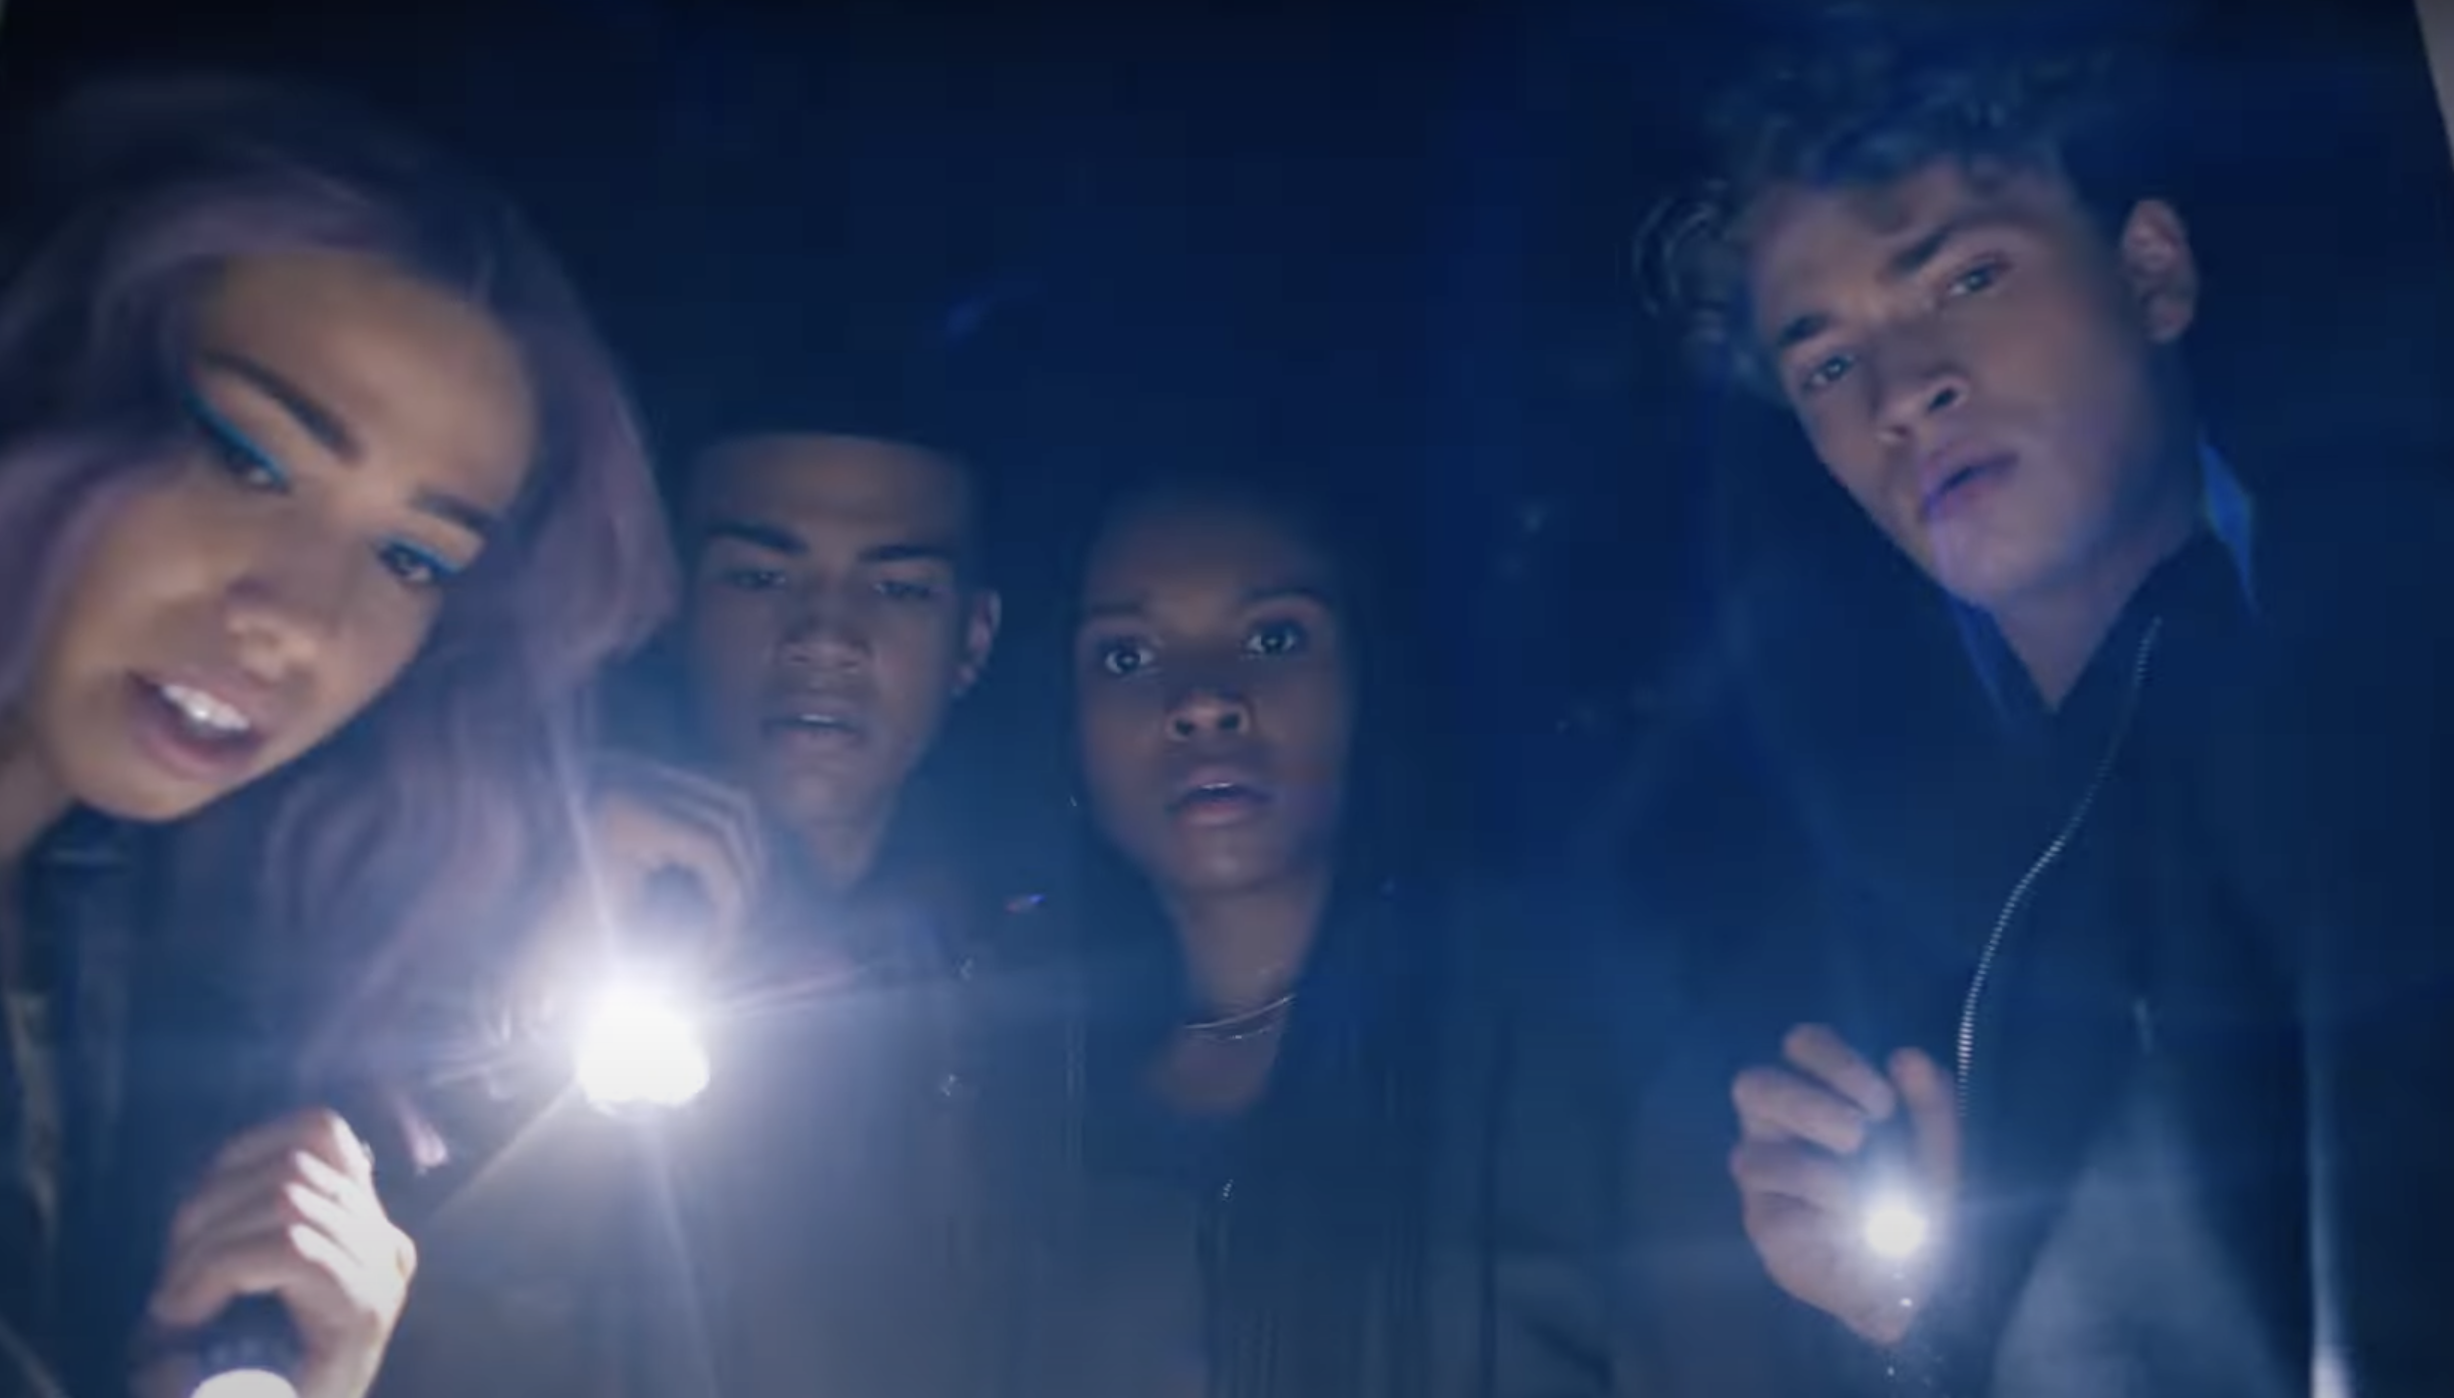 Kaci Walfal as Naomi stands around with friends holding flashlights and looking at something